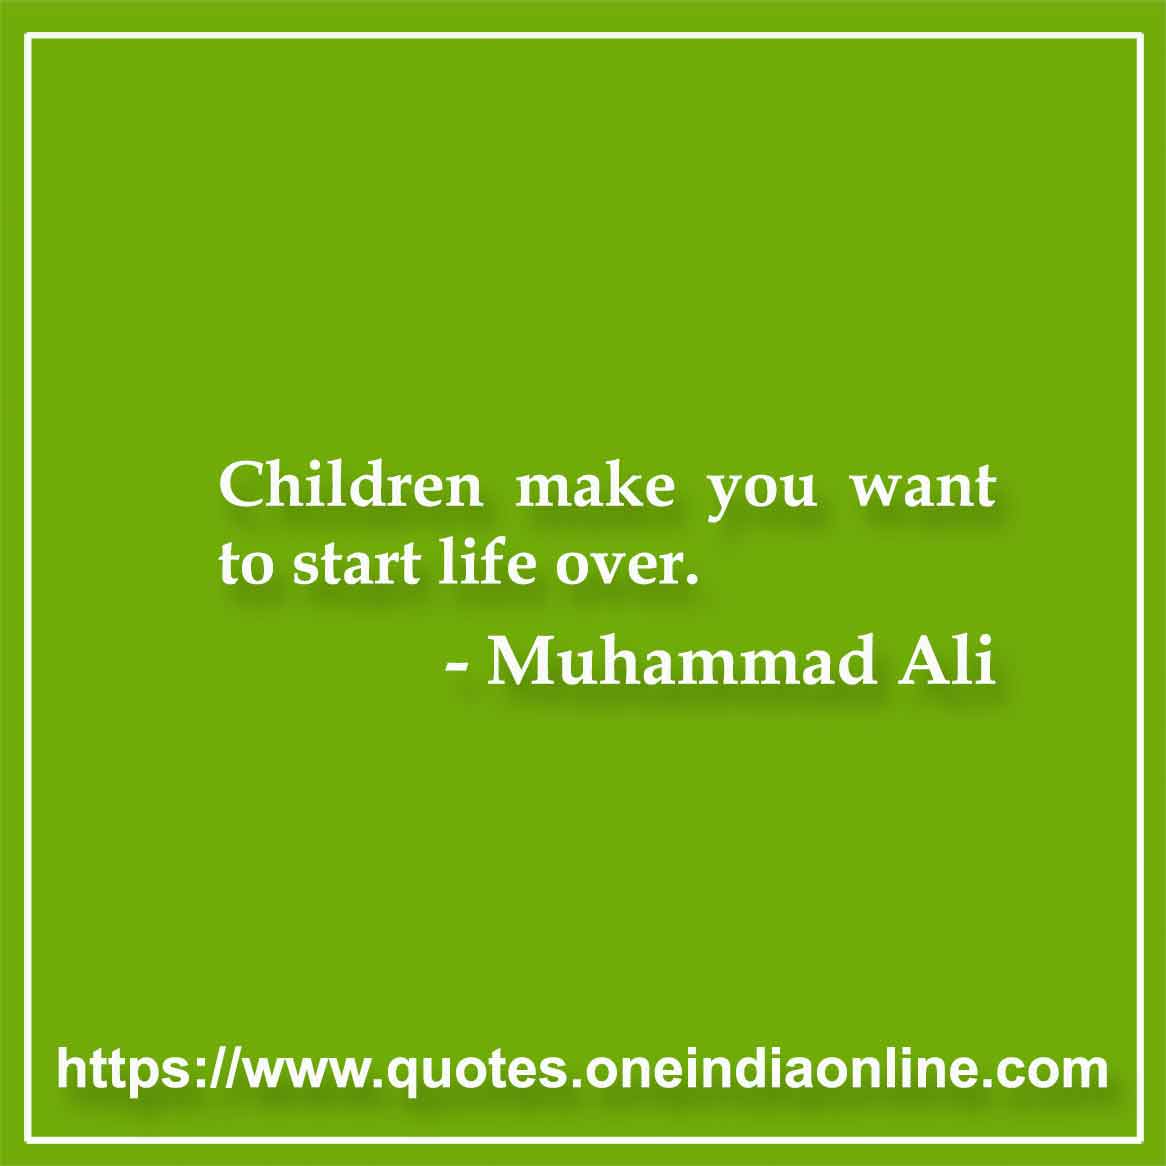 Children make you want to start life over.

- Muhammad Ali